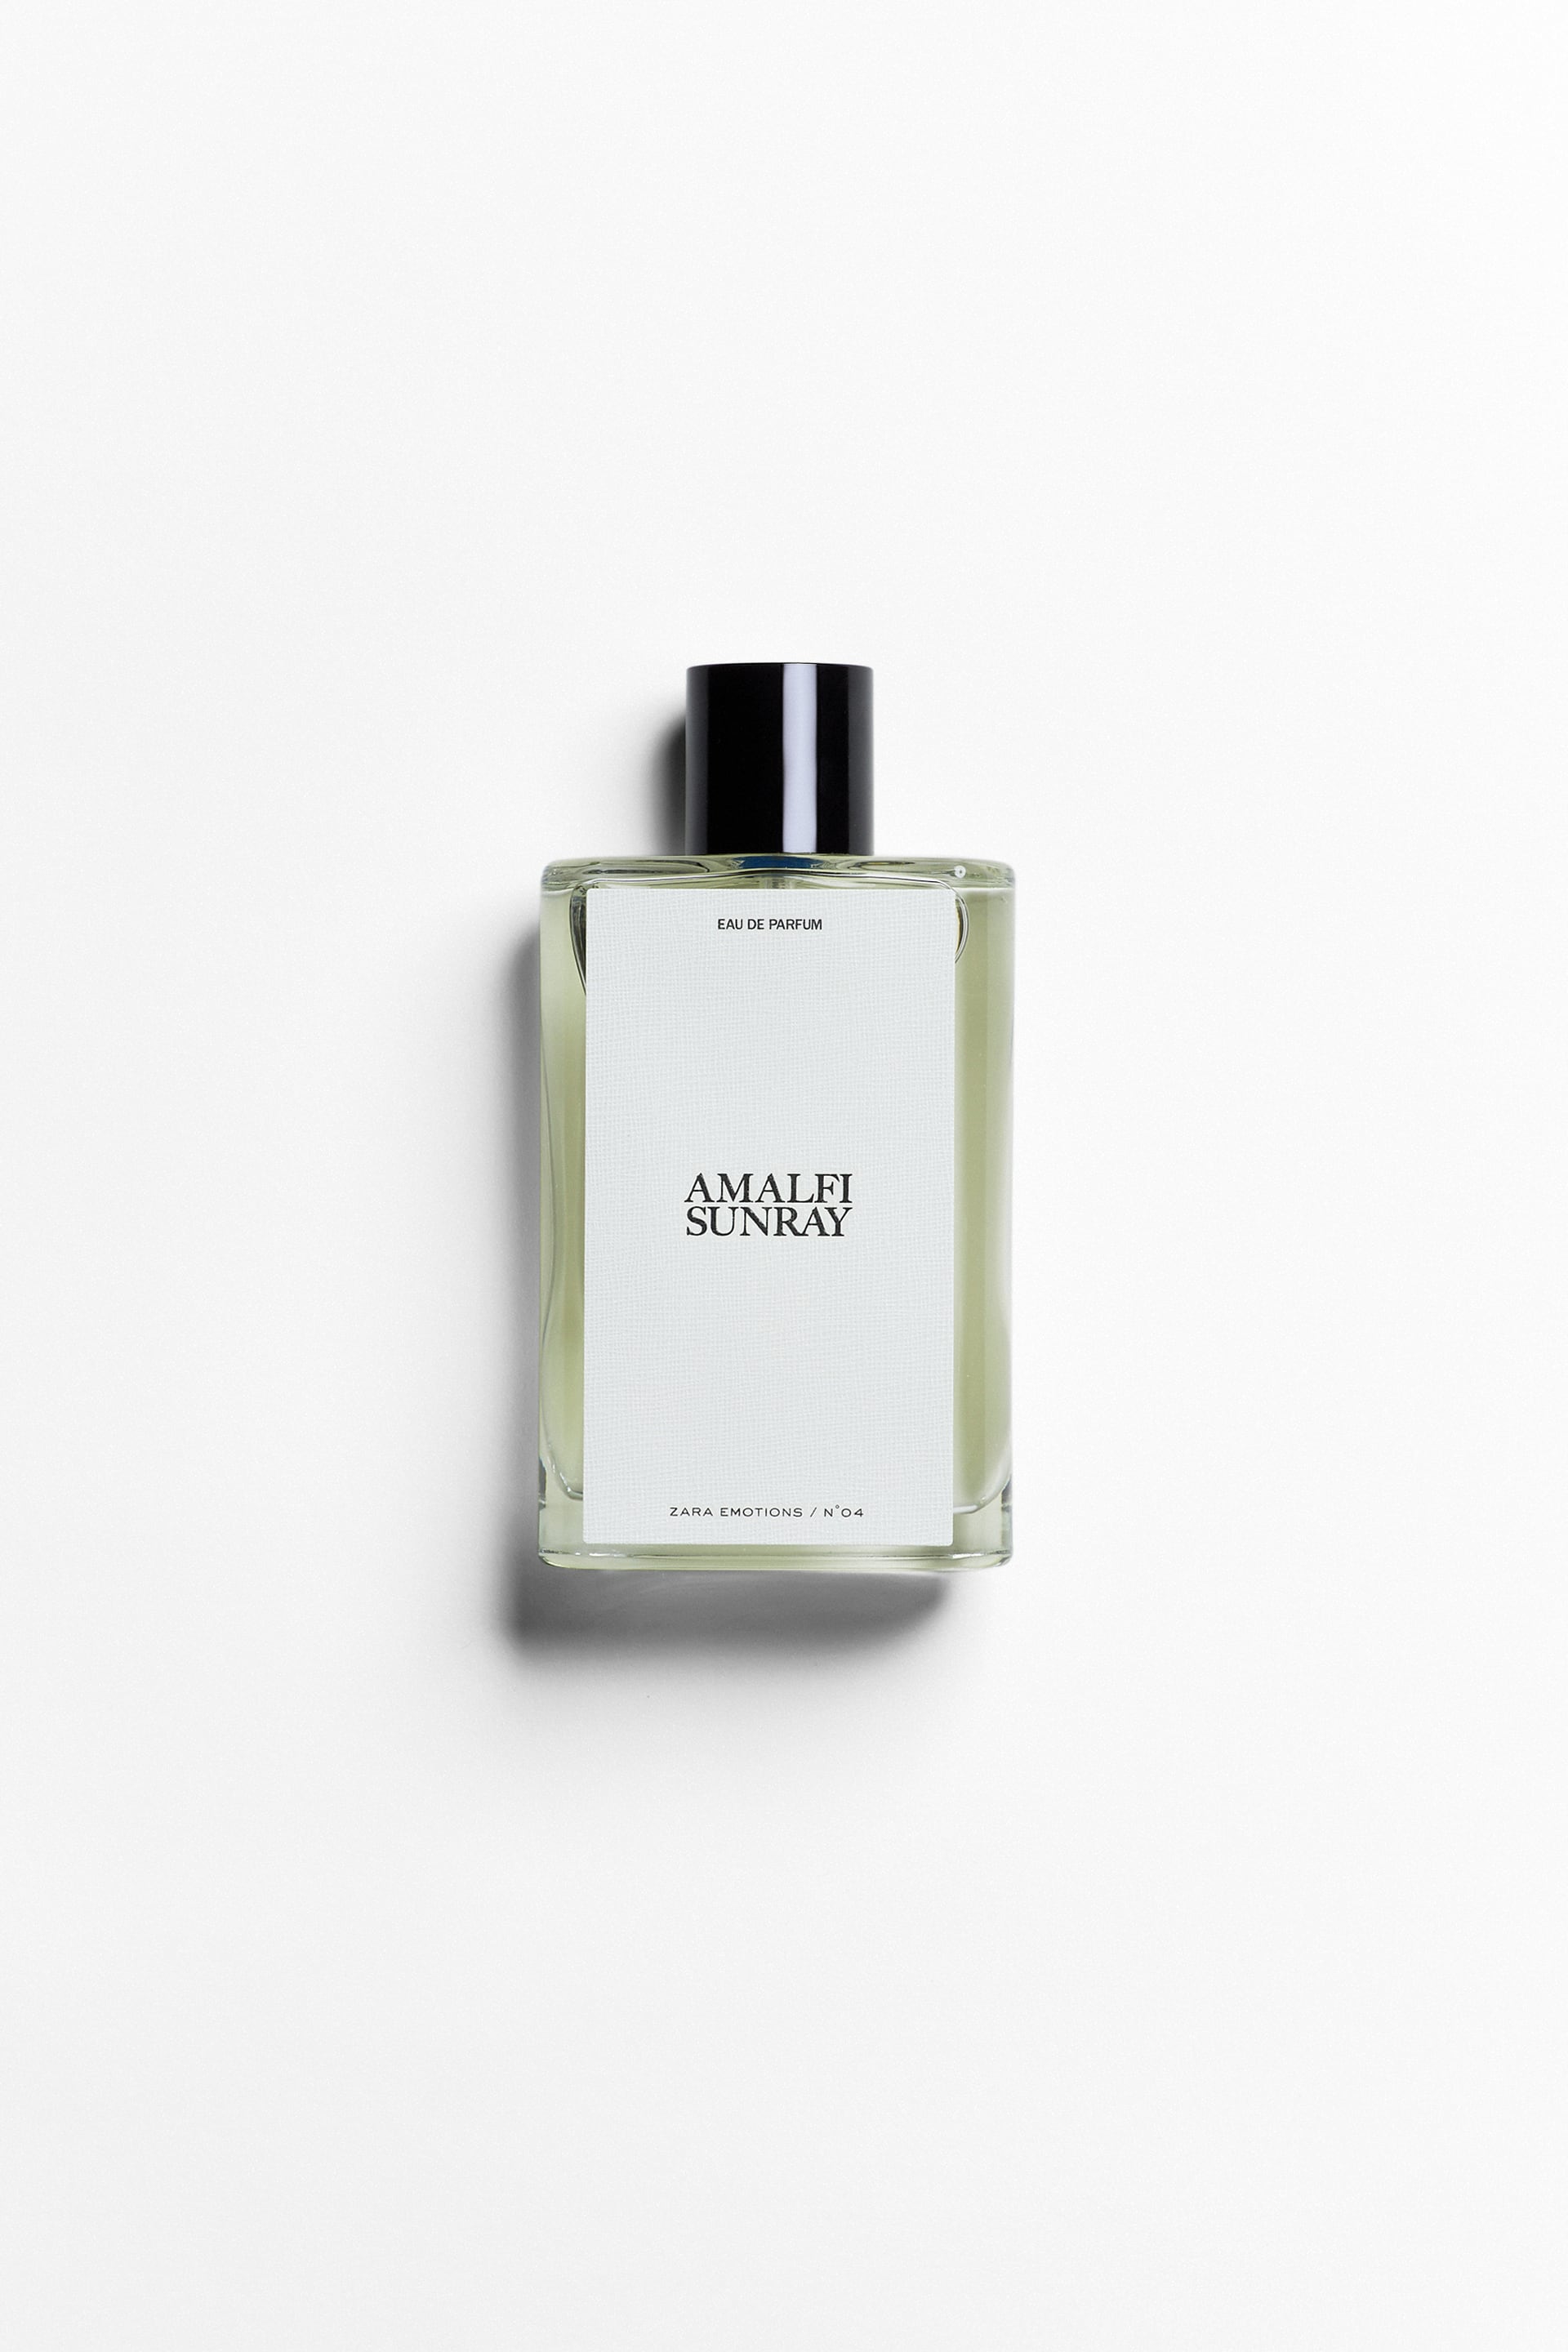 The 18 Best Zara Perfumes That Should Be on Your Vanity | Who What Wear UK